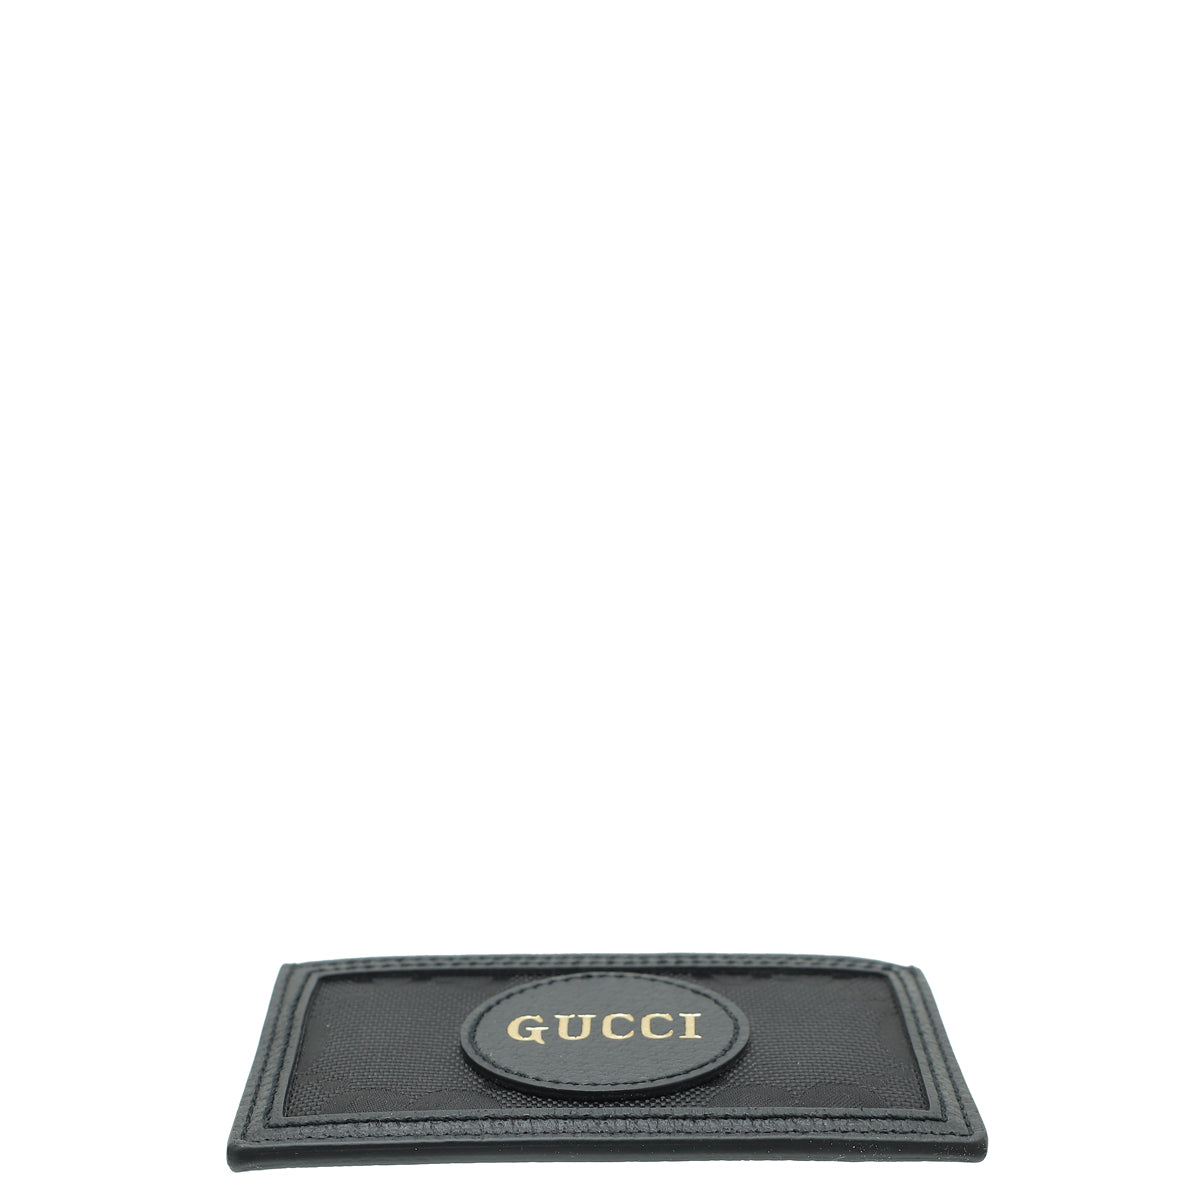 GUCCI: Off The Grid credit card holder in GG Supreme nylon and leather -  Black